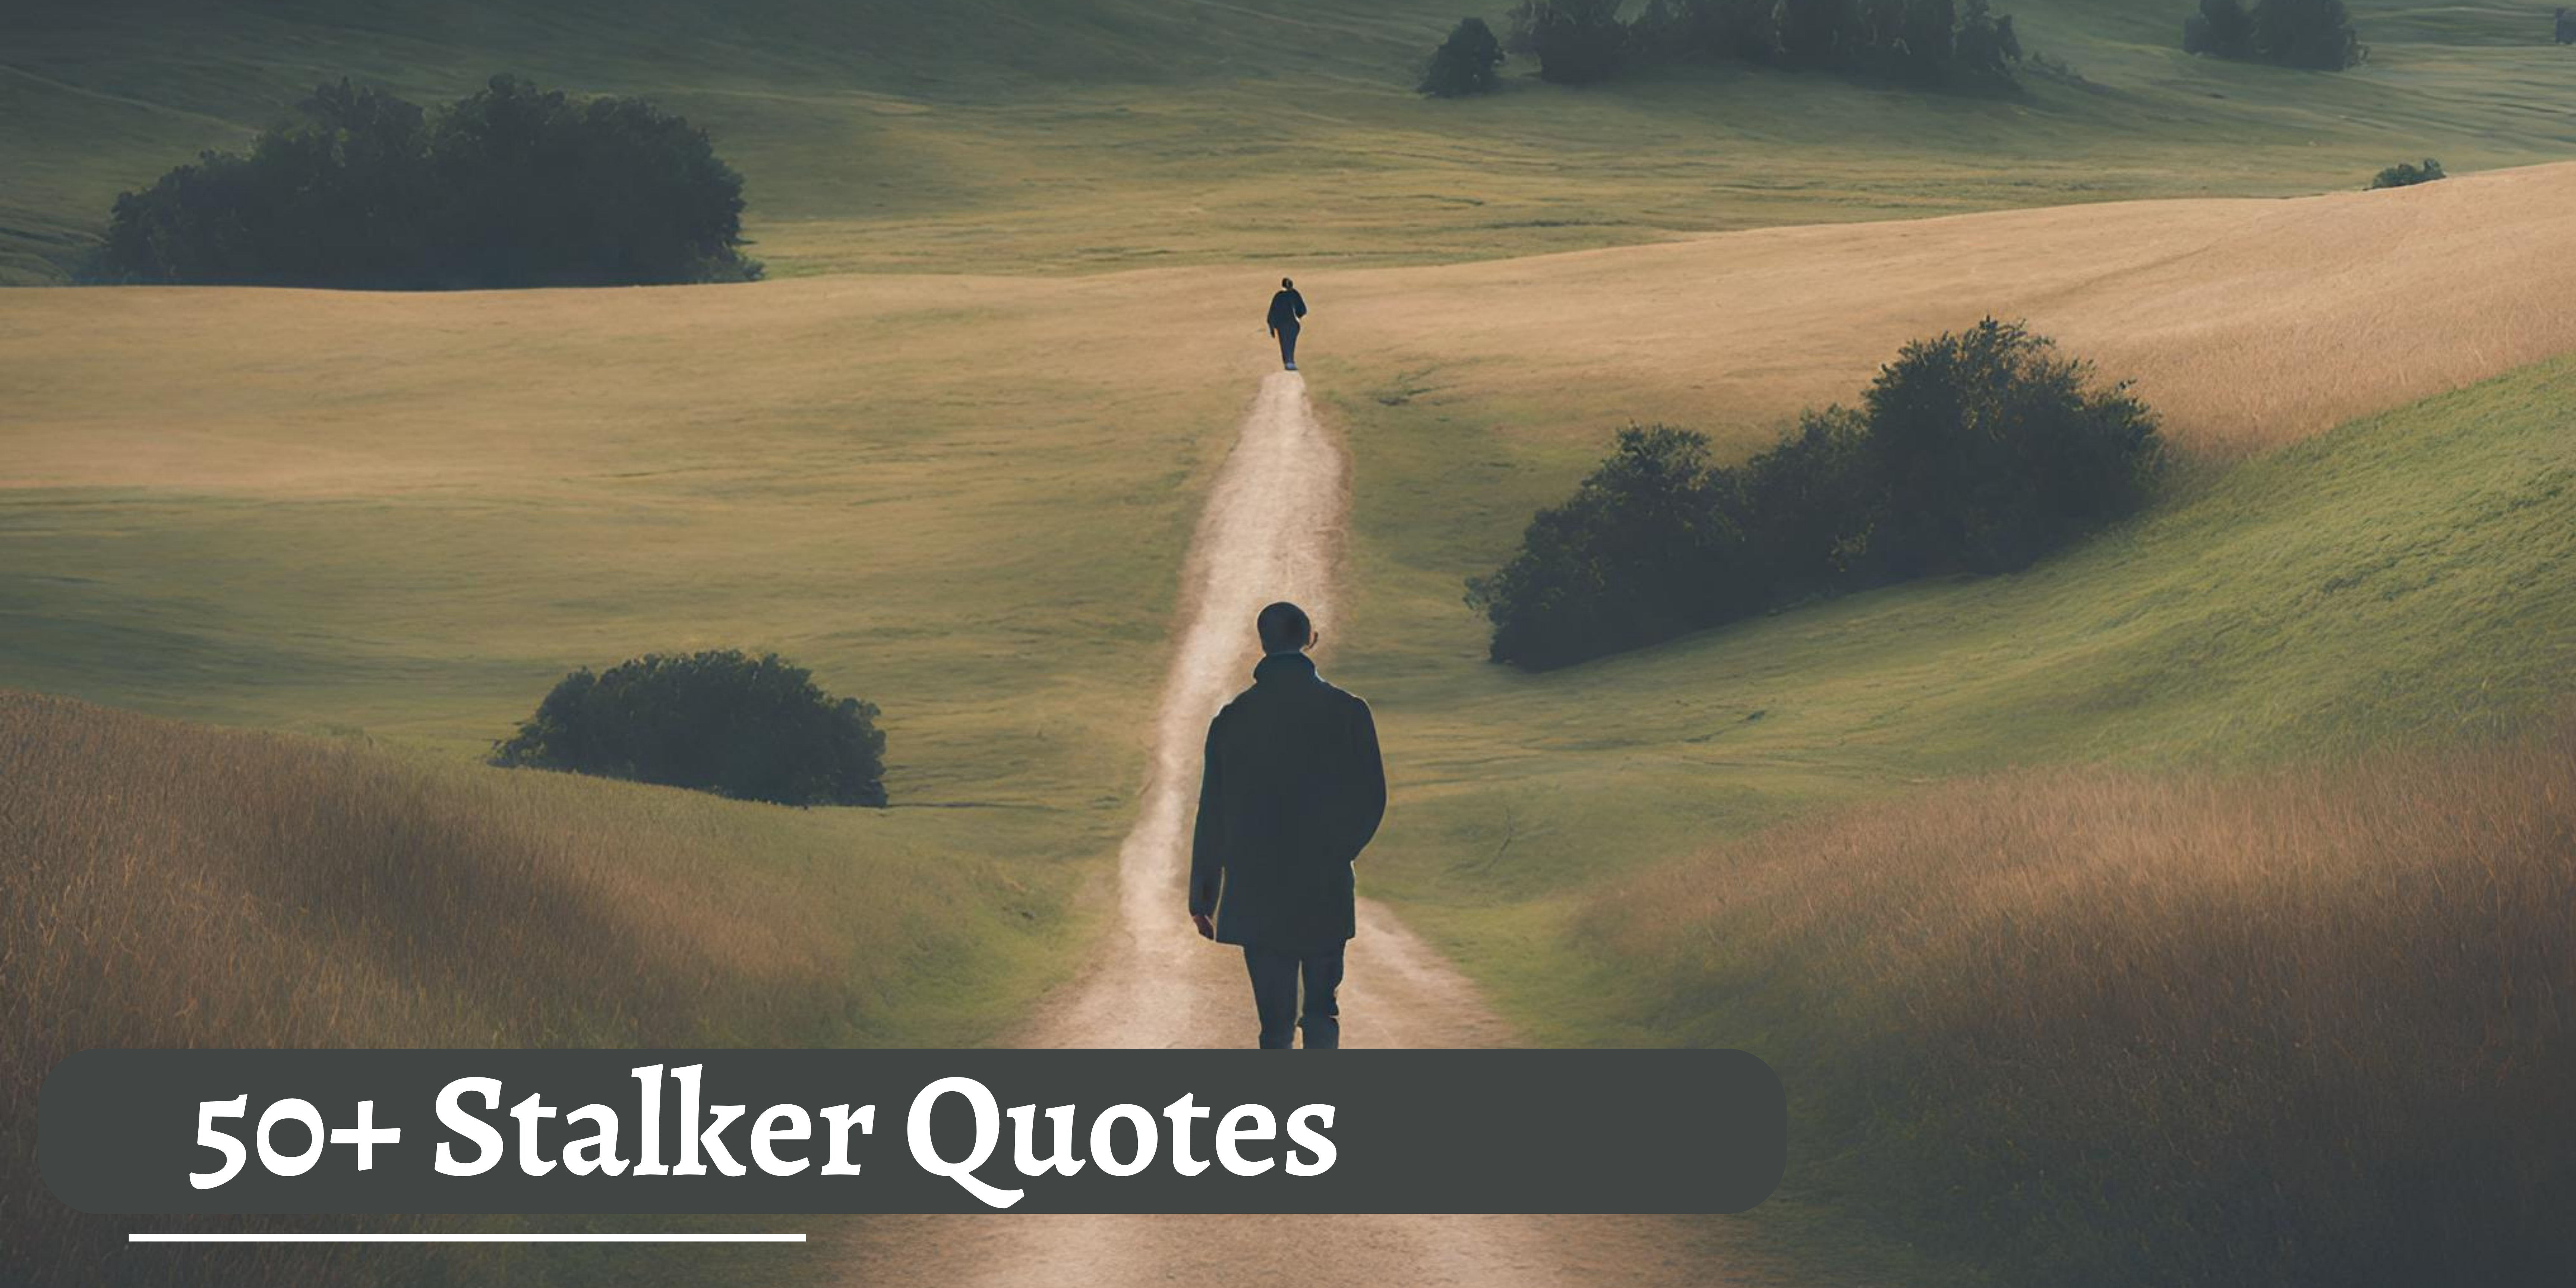 50+ Stalker Quotes  – Detailed List